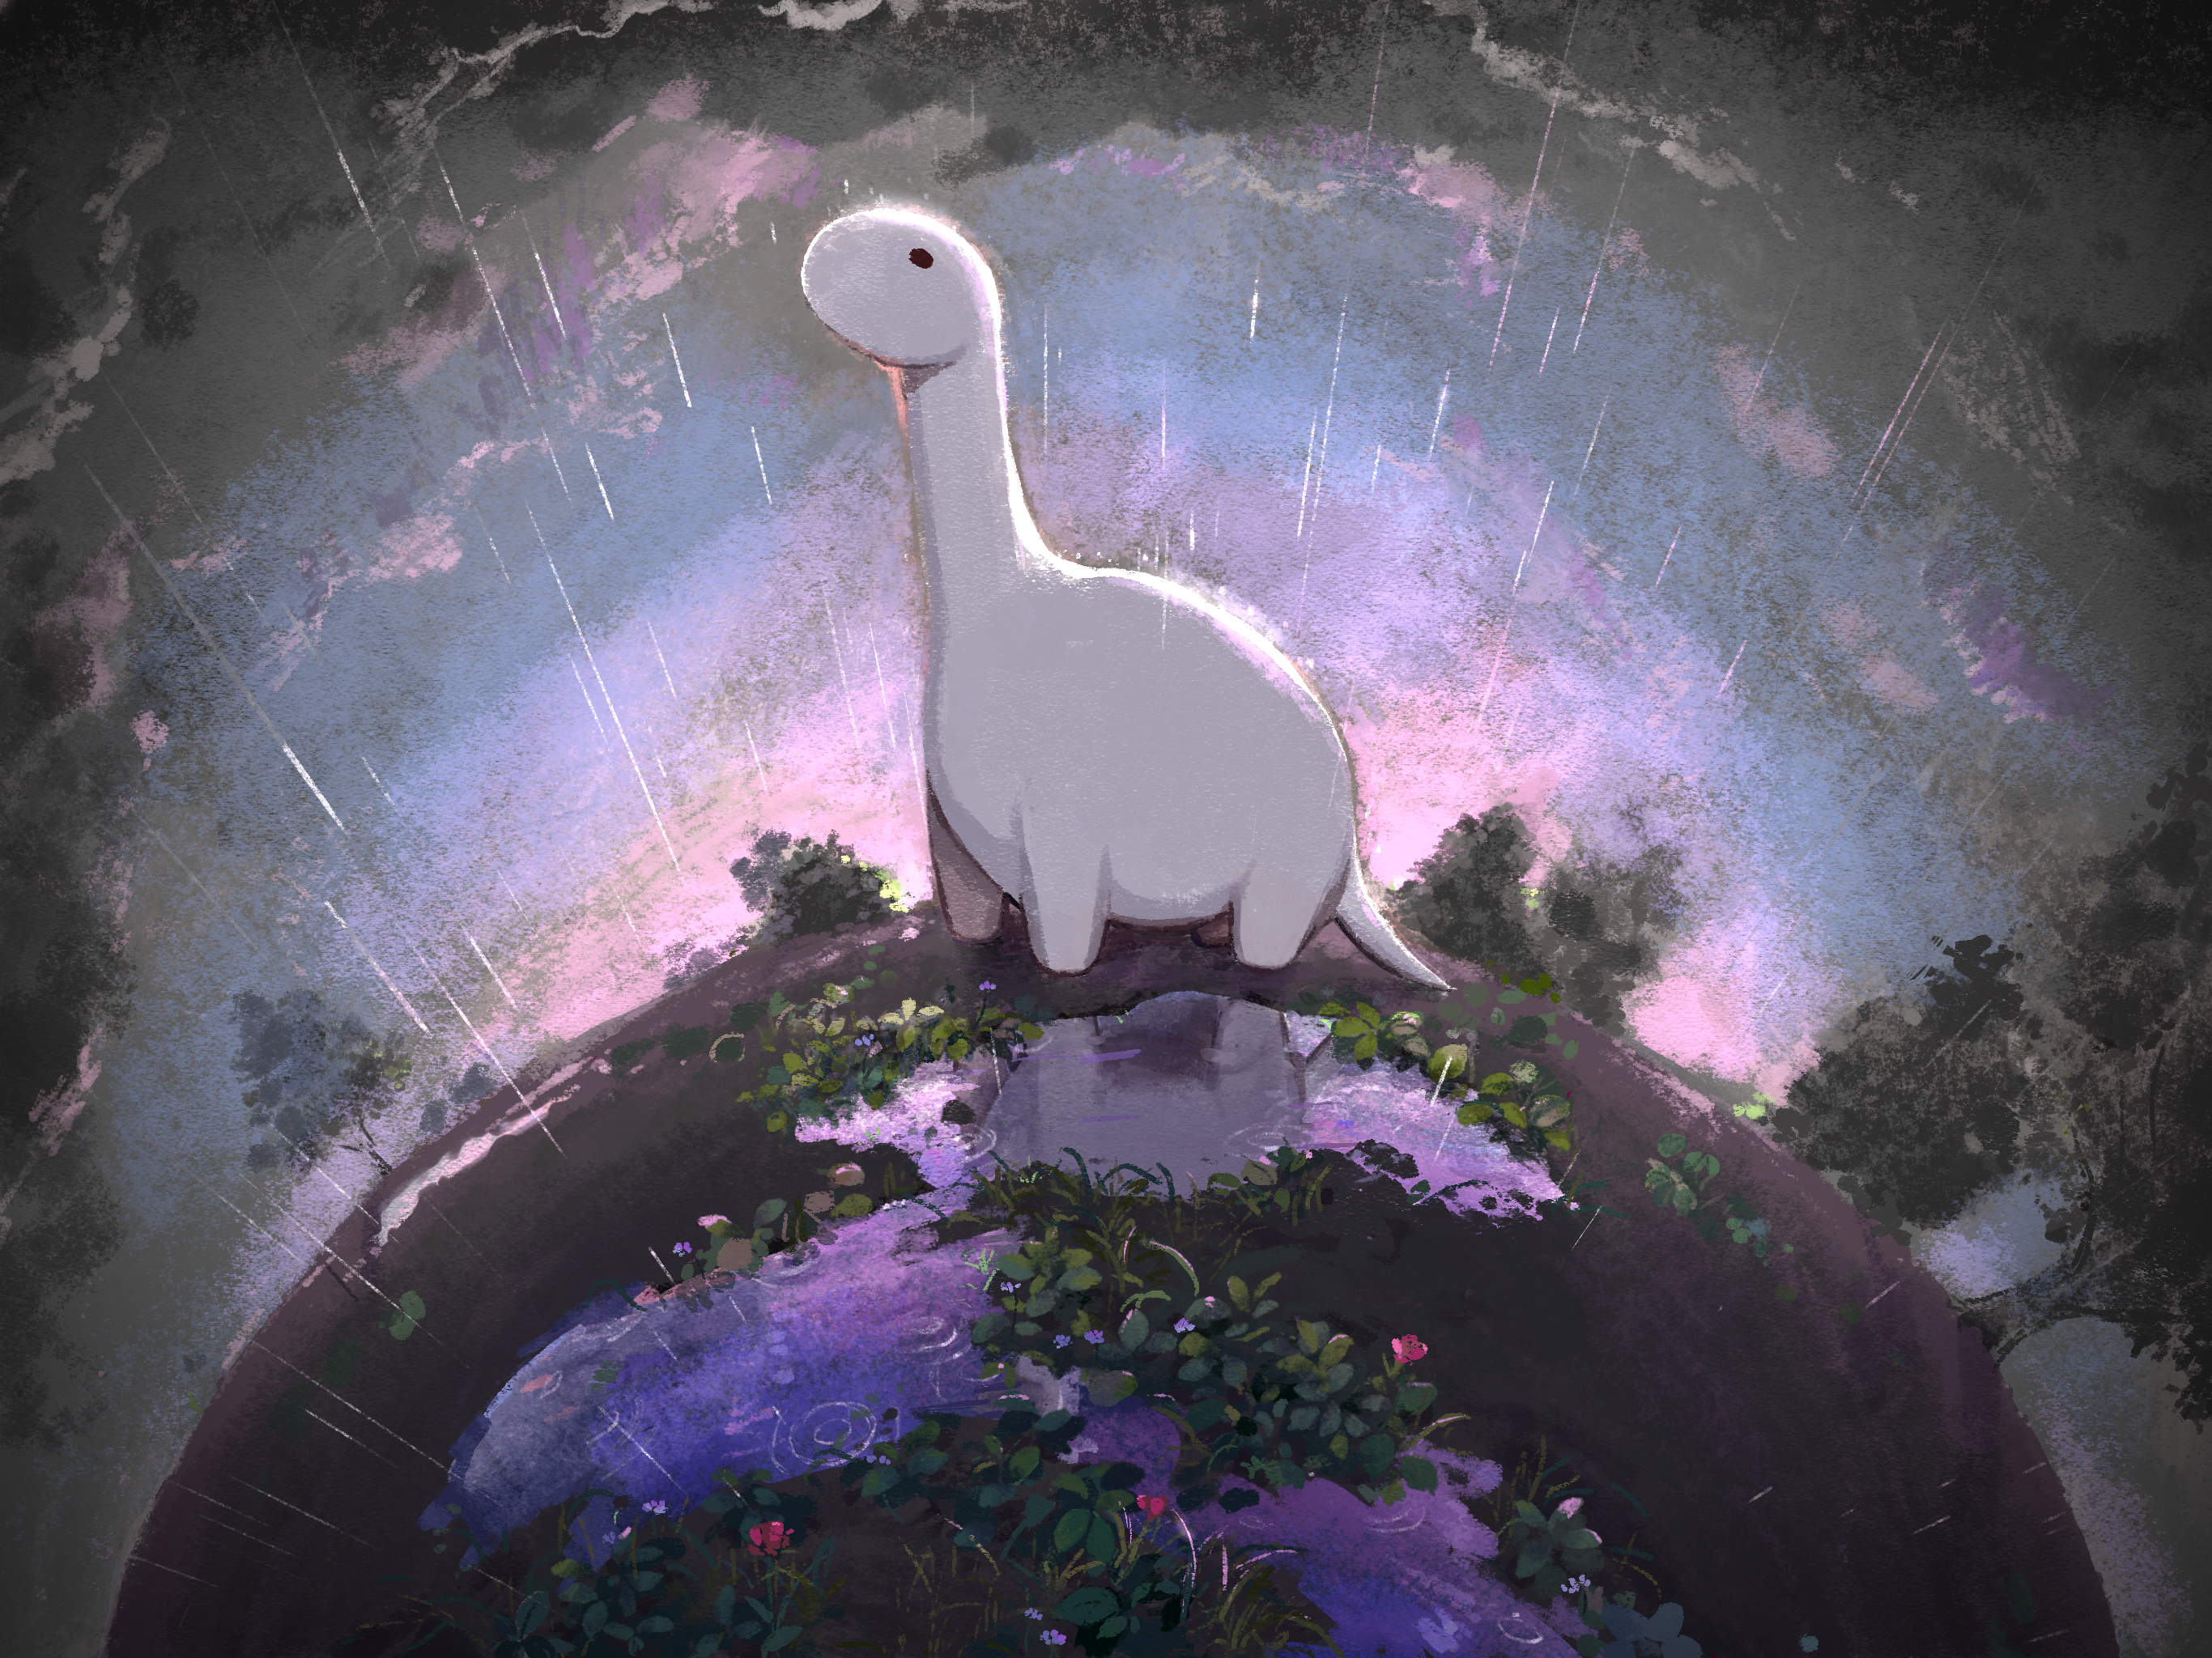 a gloomy scene with a white dinosaur standing in the rain on a purple planet